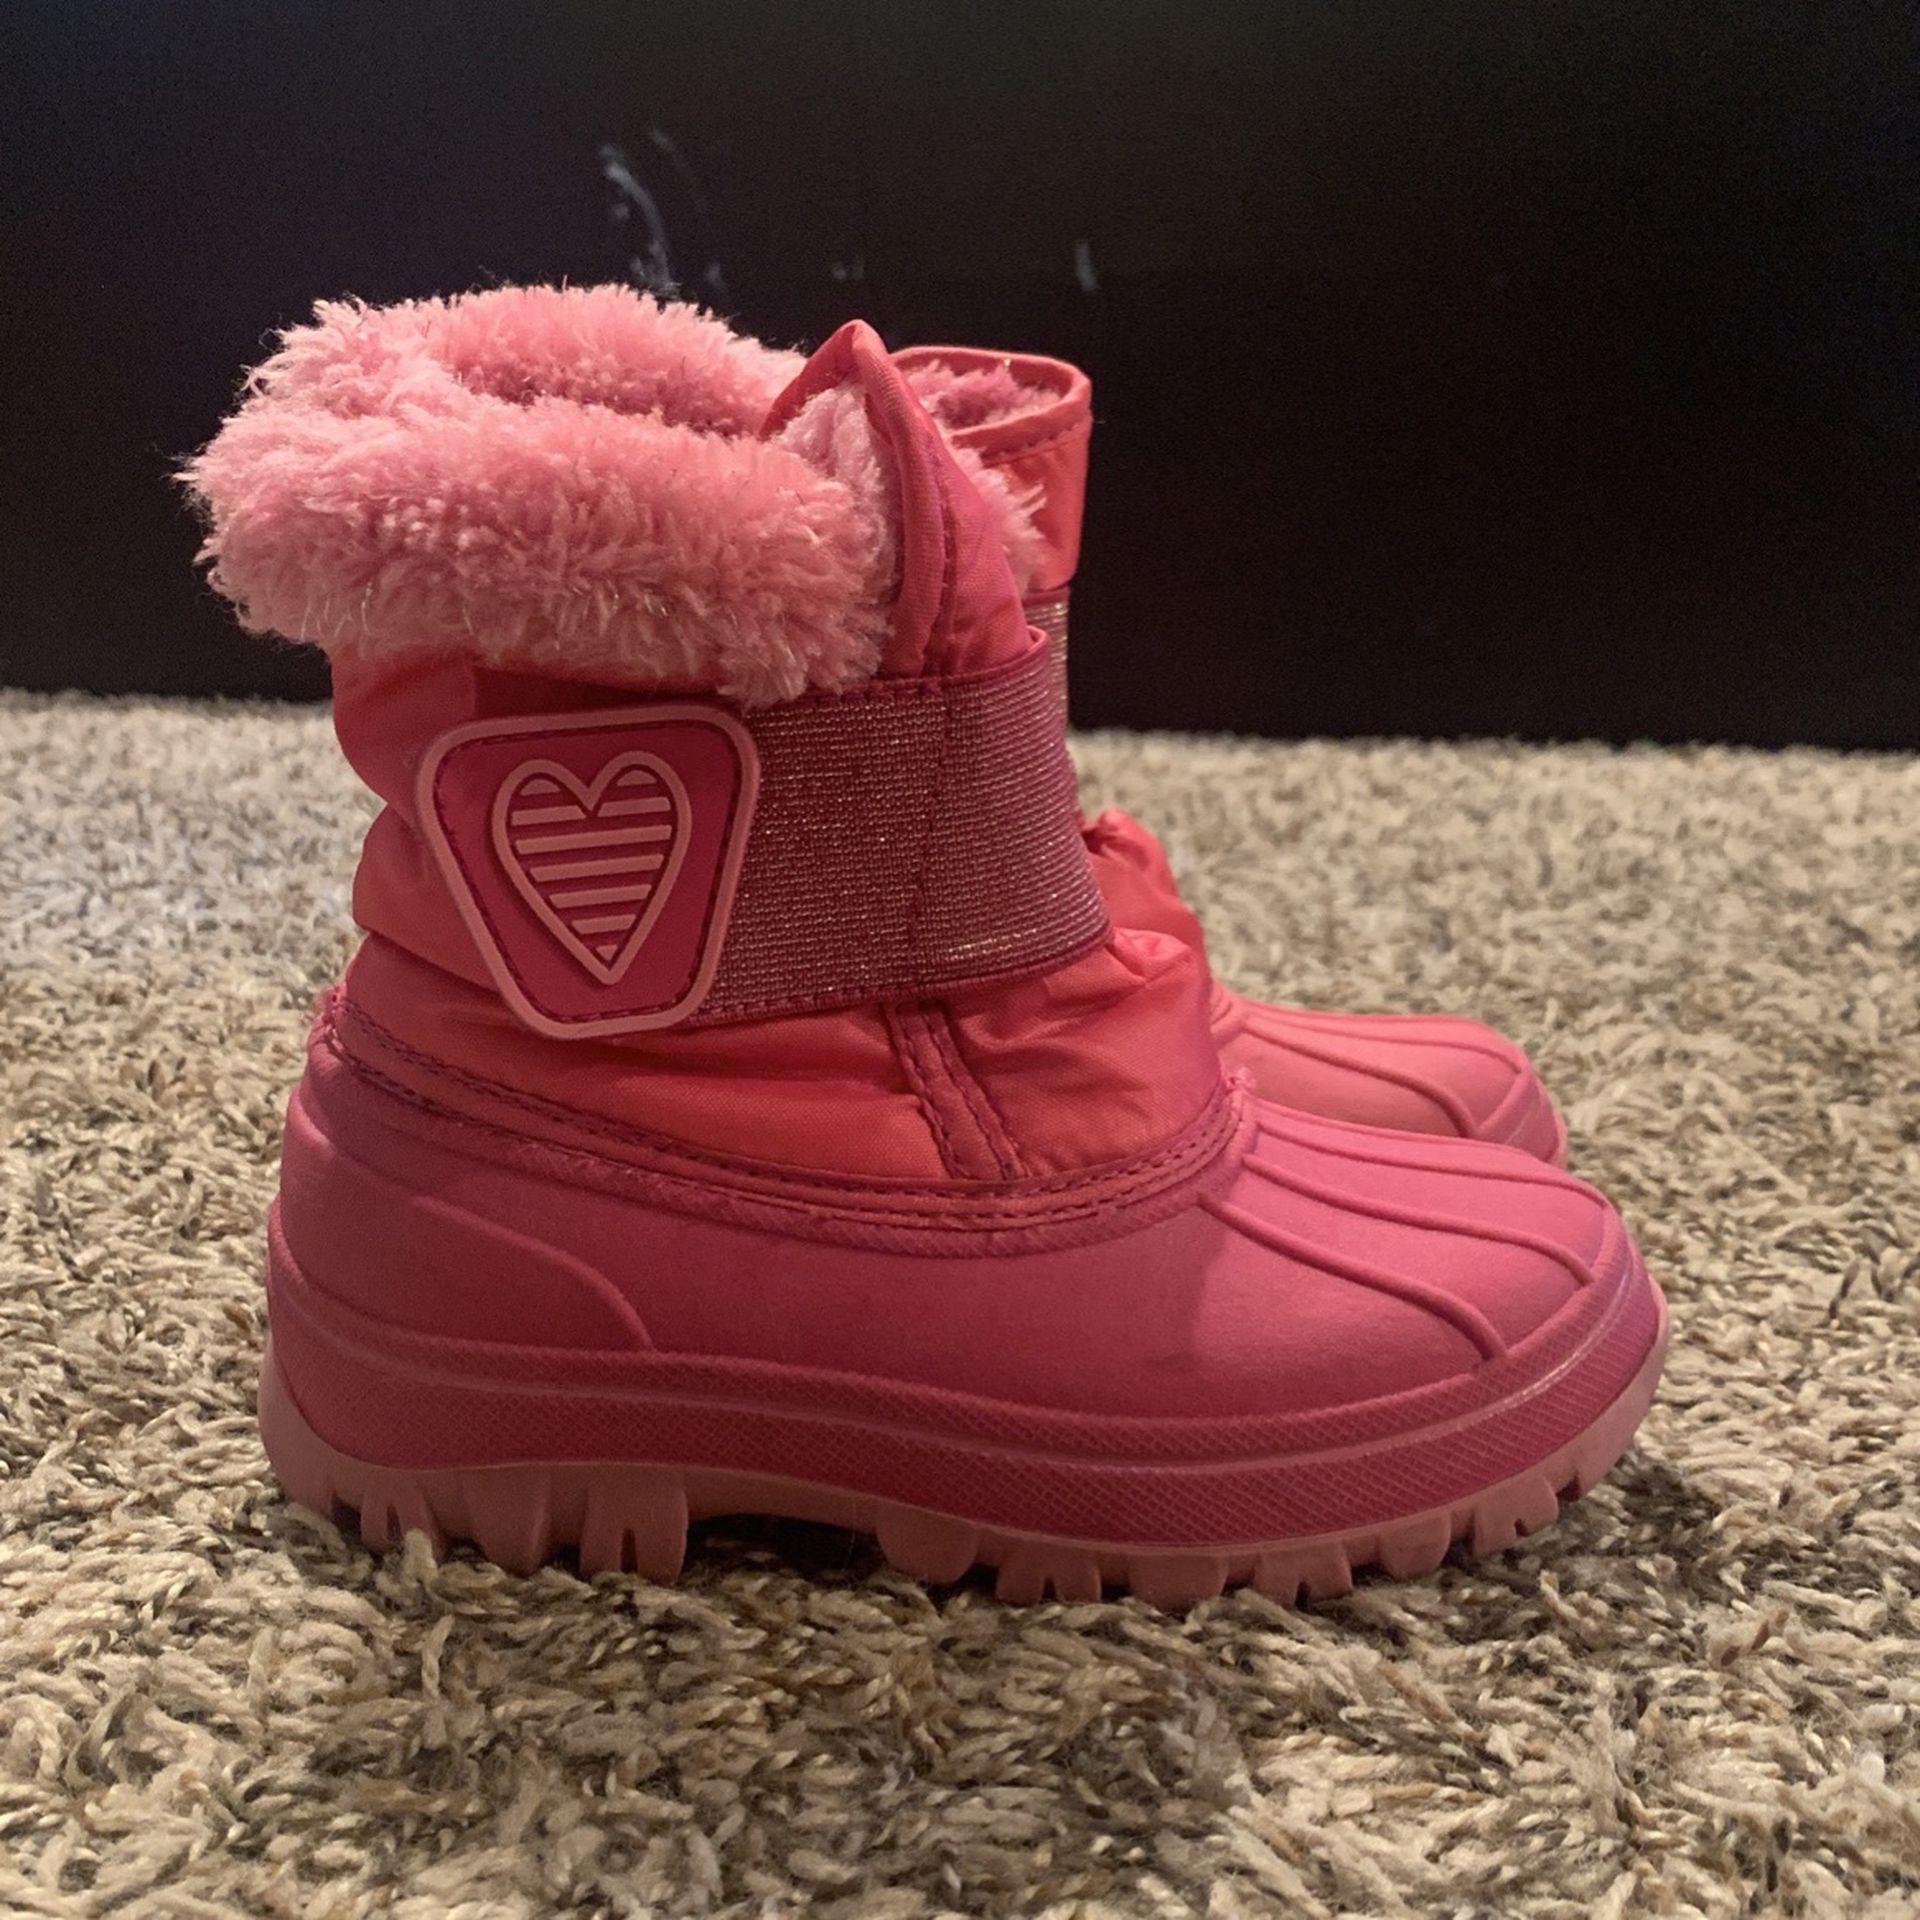 Girls Pink Thermolite Snow Boots From Target Toddler Size 9